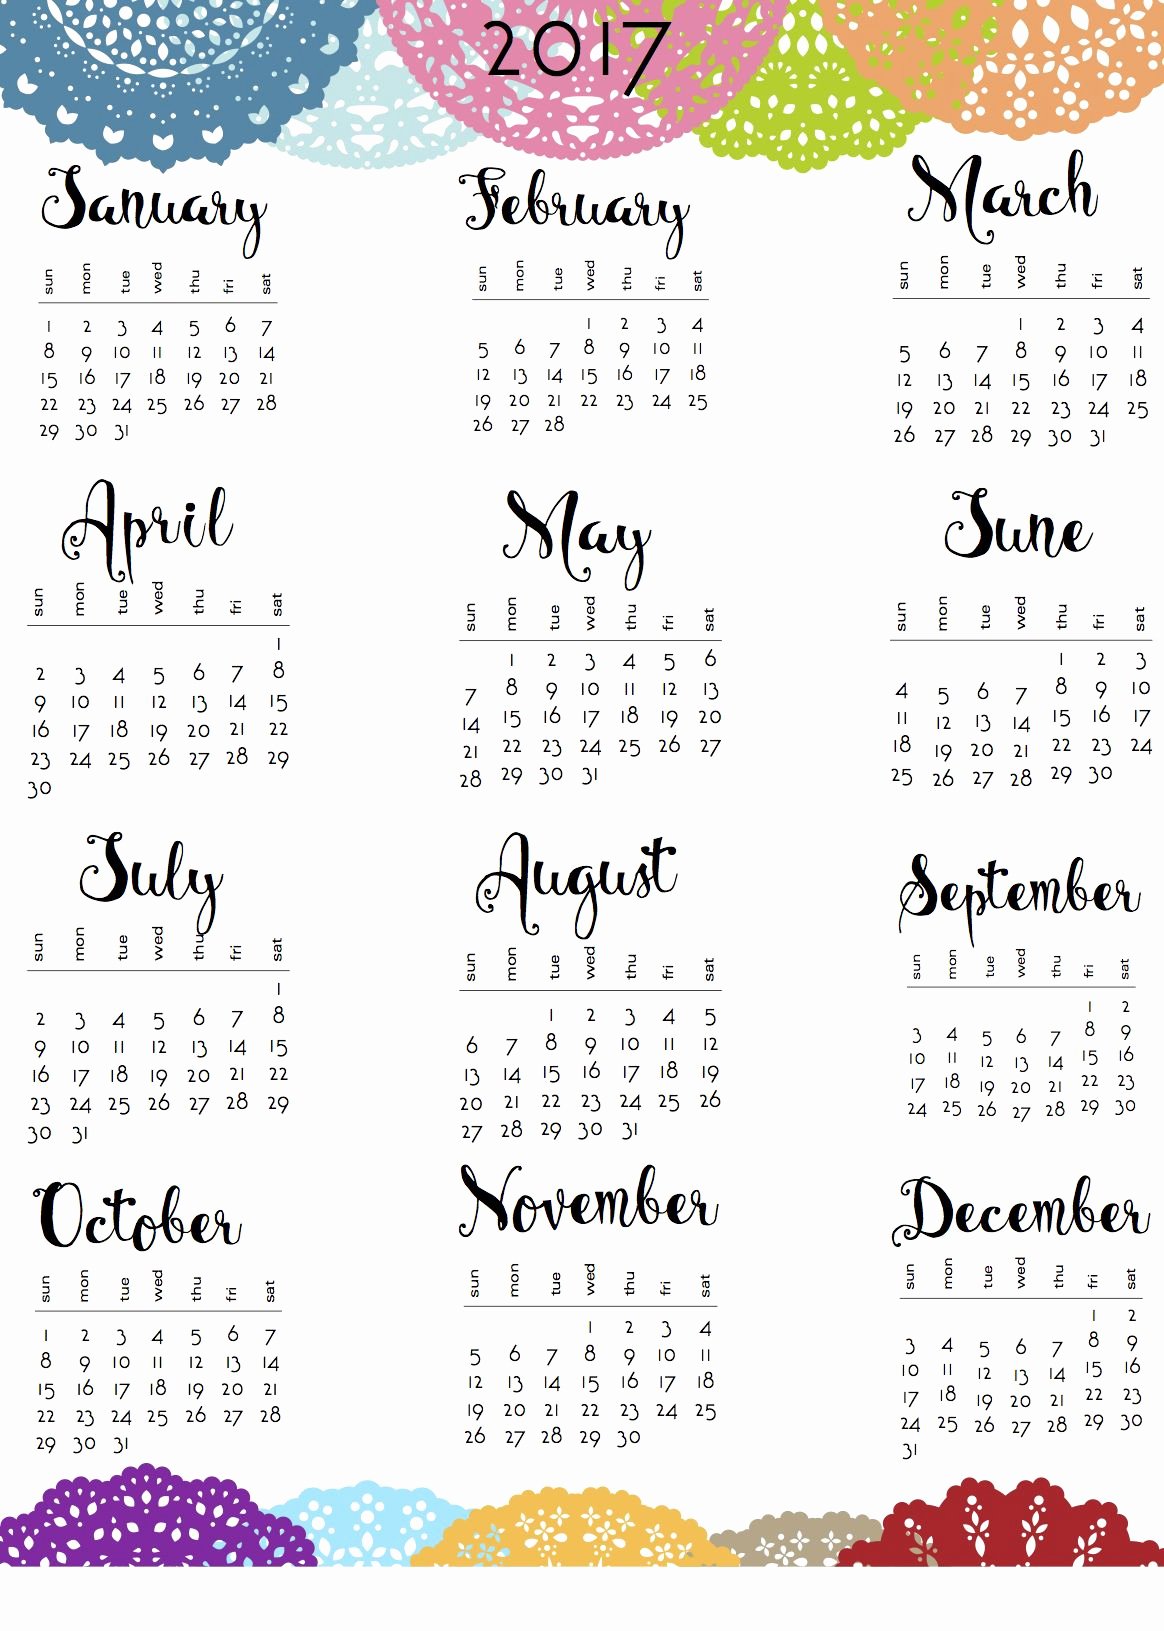 Paint Schedule Template Awesome A Few Calendars by Request